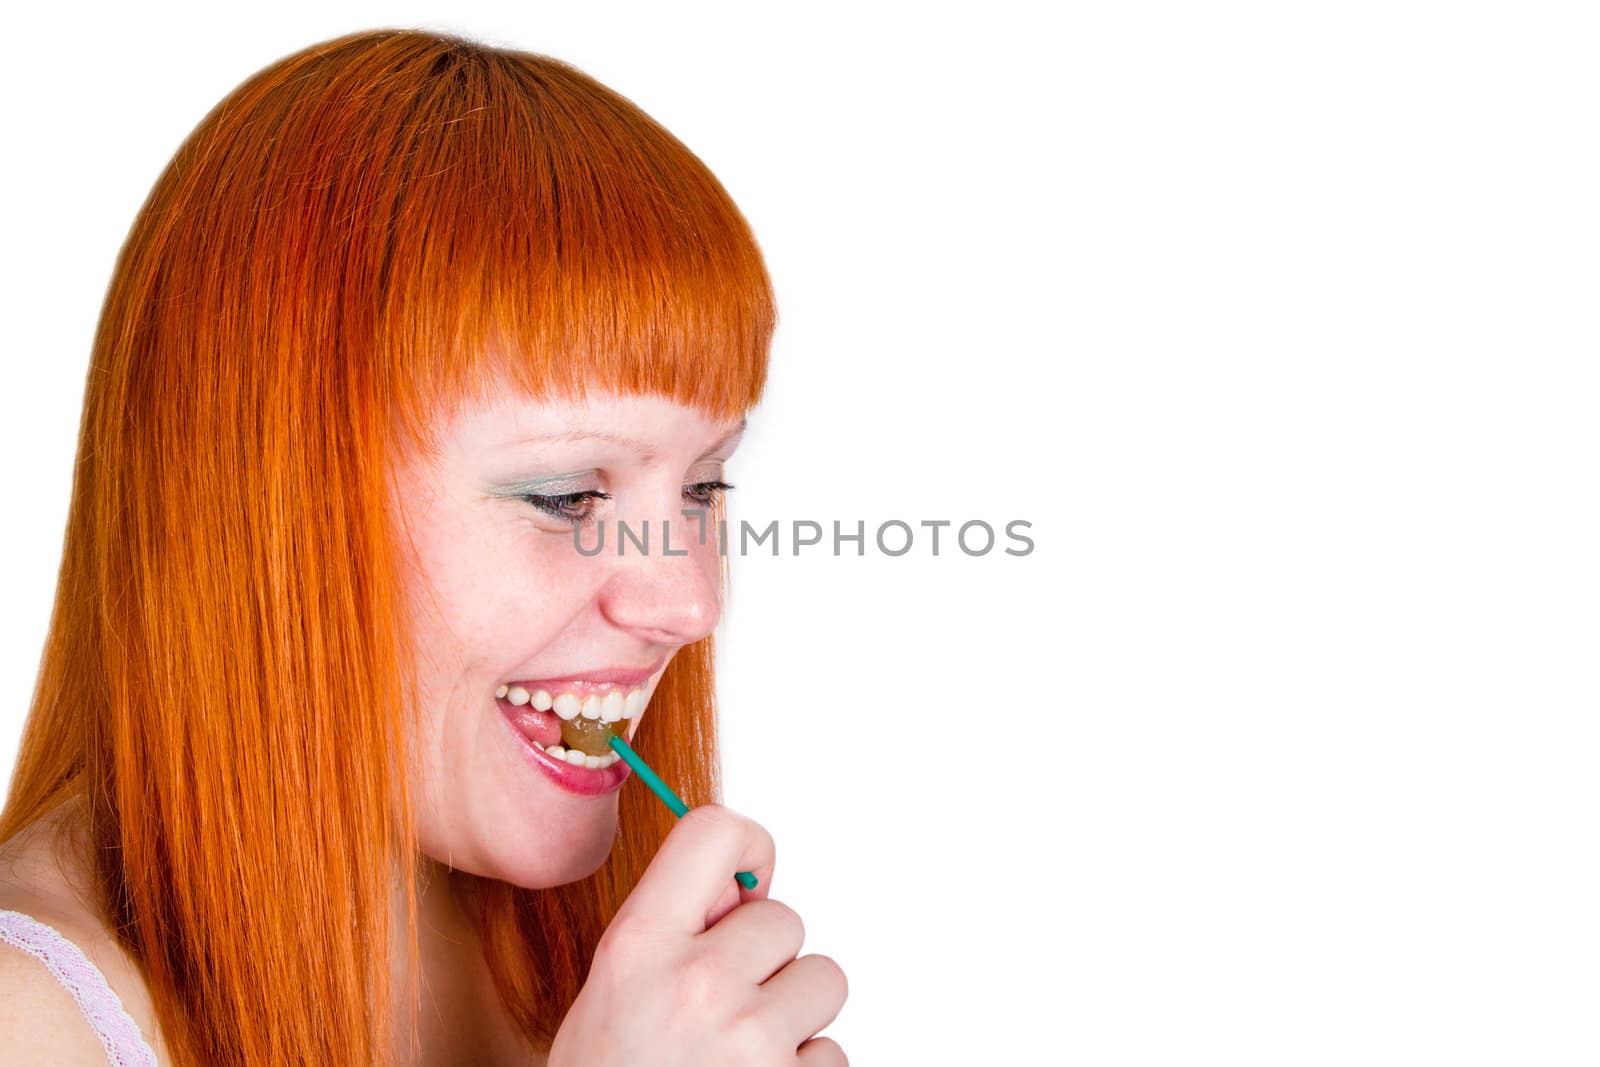 Young pretty woman with lollipop on her lips. Isolated over white background.